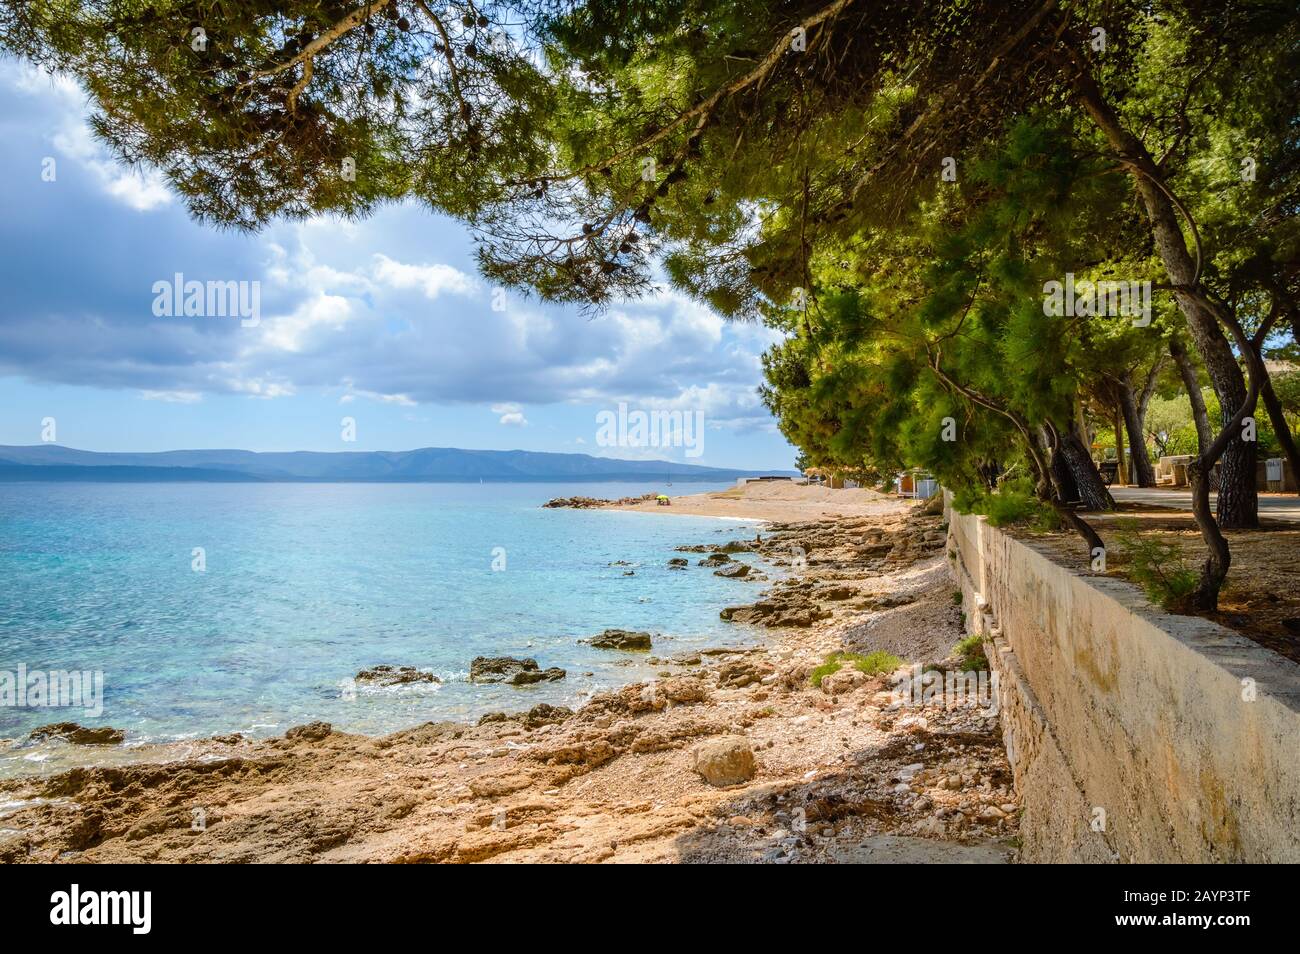 Coastline in Bol, Brac island, Croatia. Scenic view with pine trees, mountains and turquoise water of Adriatic Sea on sunny day. Famous tourist destin Stock Photo